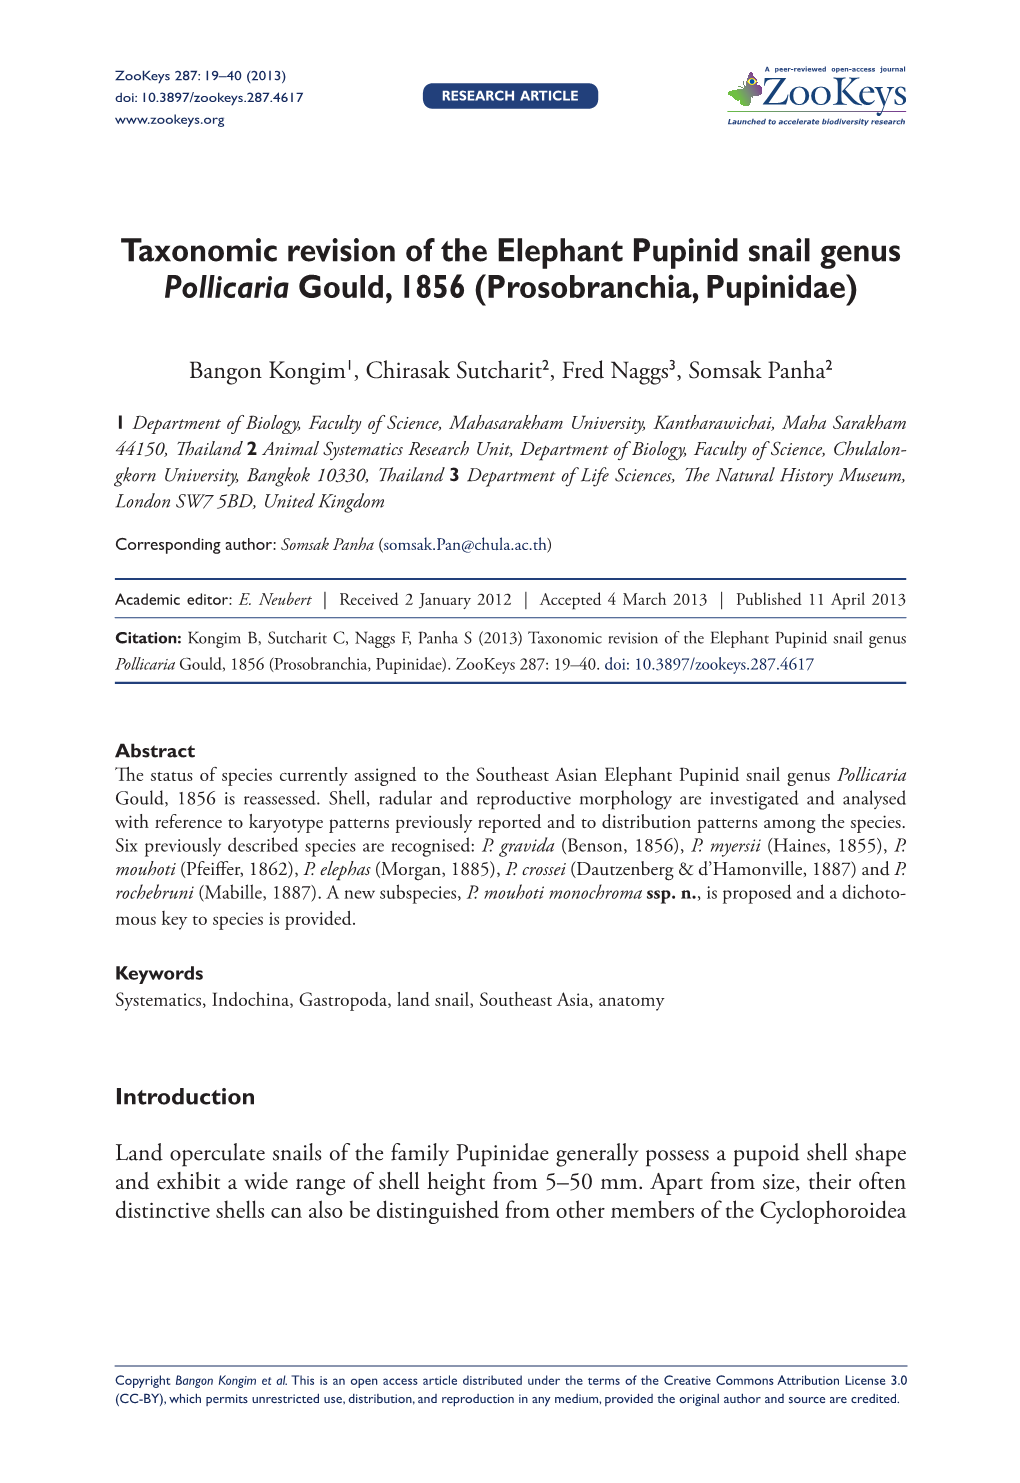 Taxonomic Revision of the Elephant Pupinid Snail Genus Pollicaria Gould, 1856 (Prosobranchia, Pupinidae)